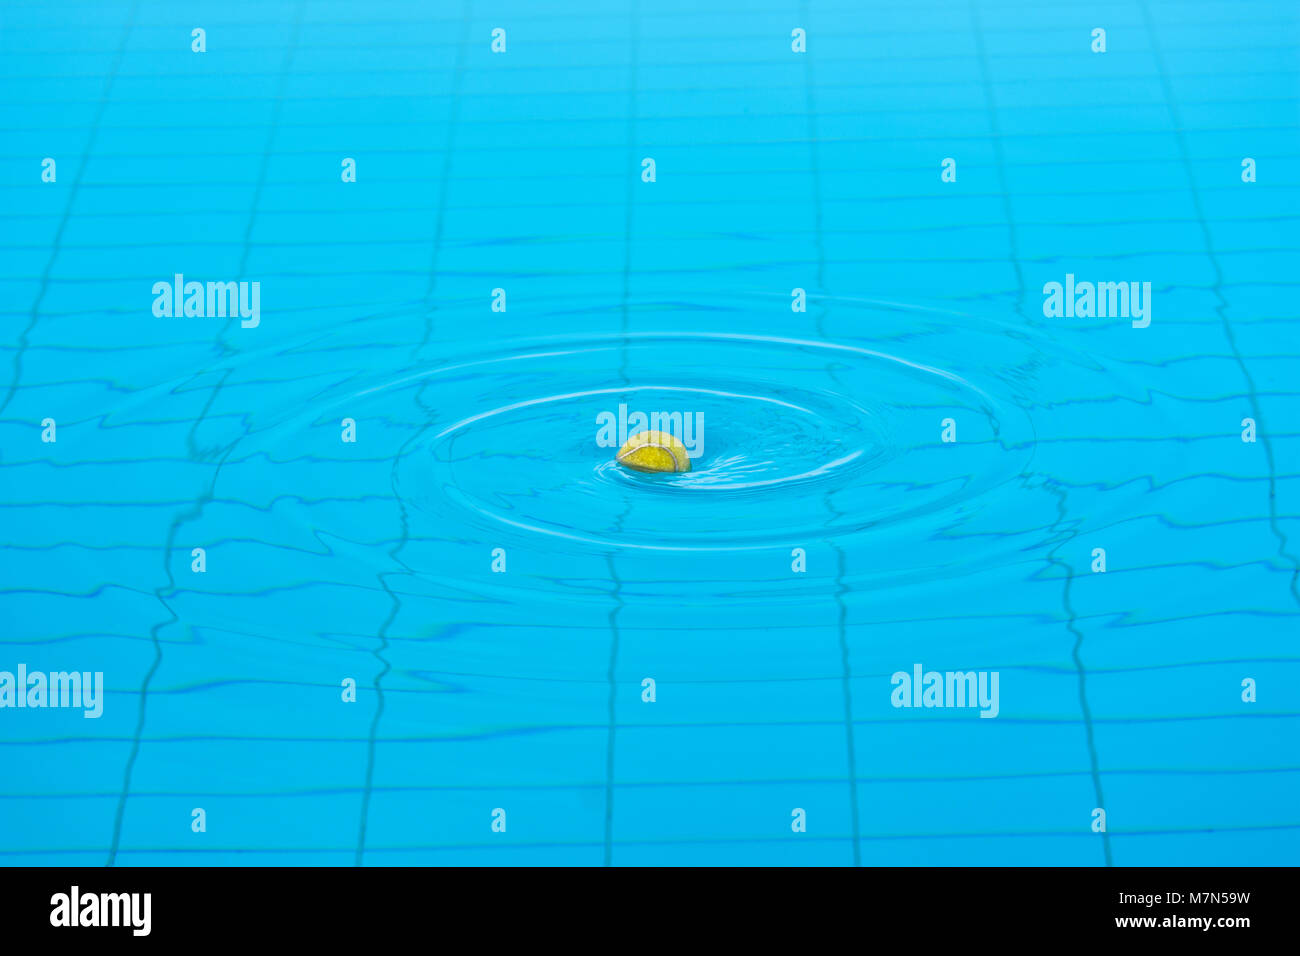 Tennis ball in the center of twirling water surface of a swimming pool. Stock Photo